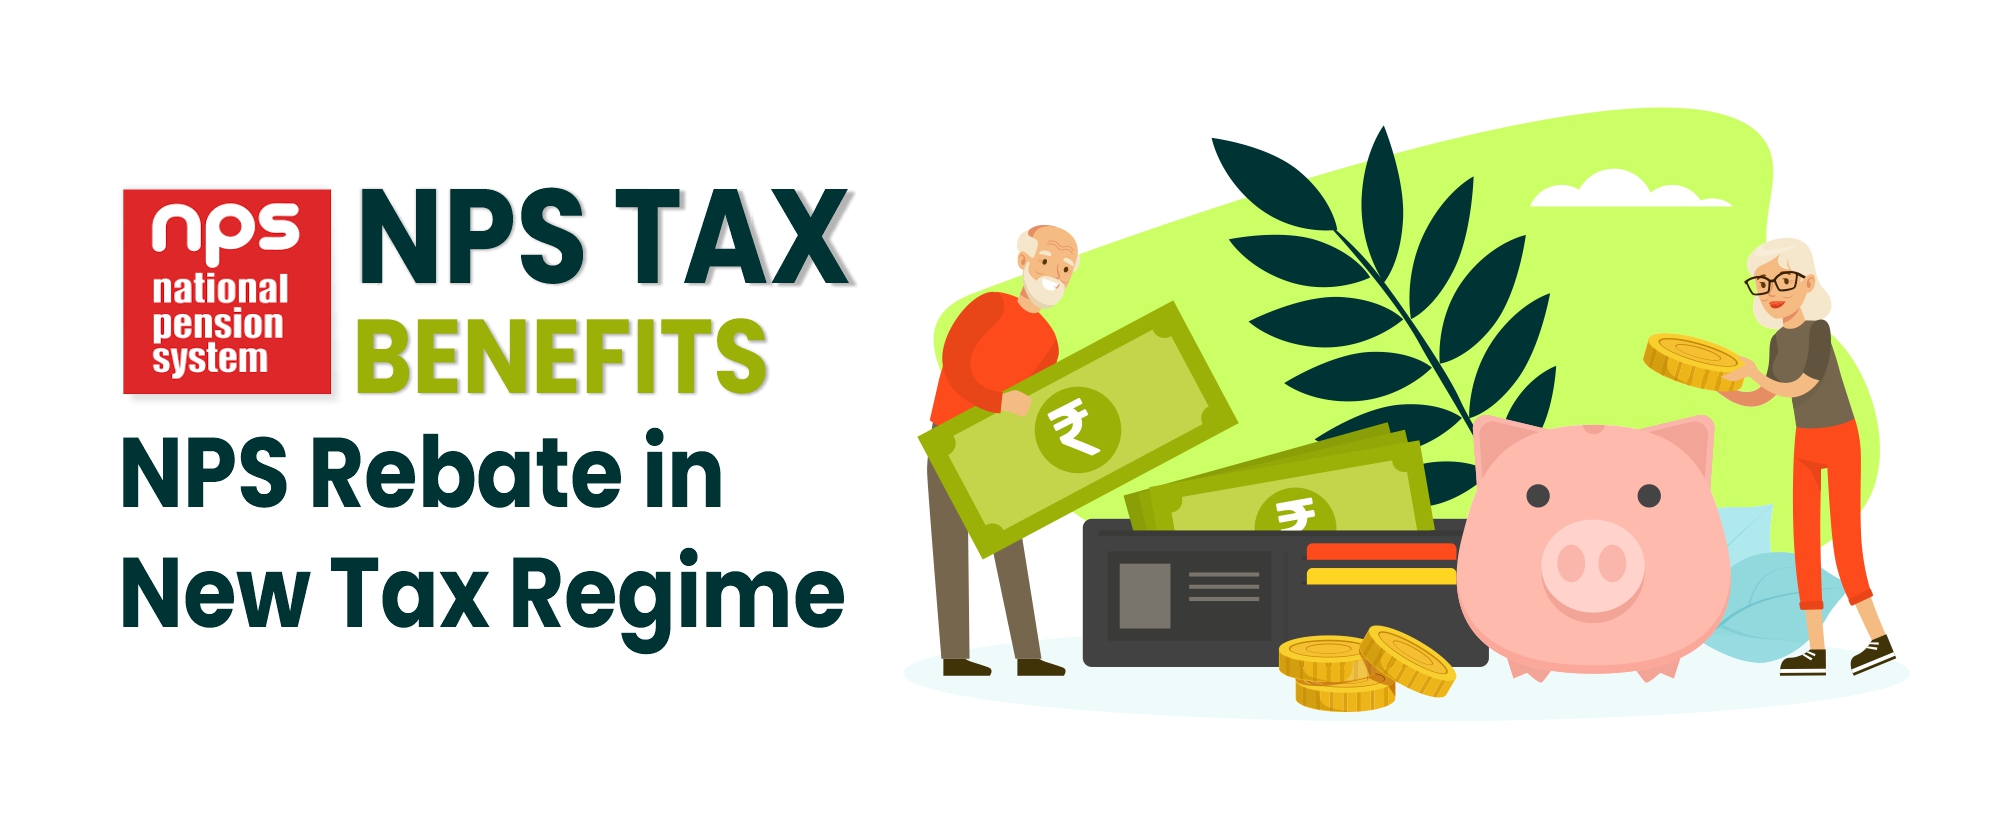 nps-tax-benefits-know-more-about-nps-tax-deduction-alankit